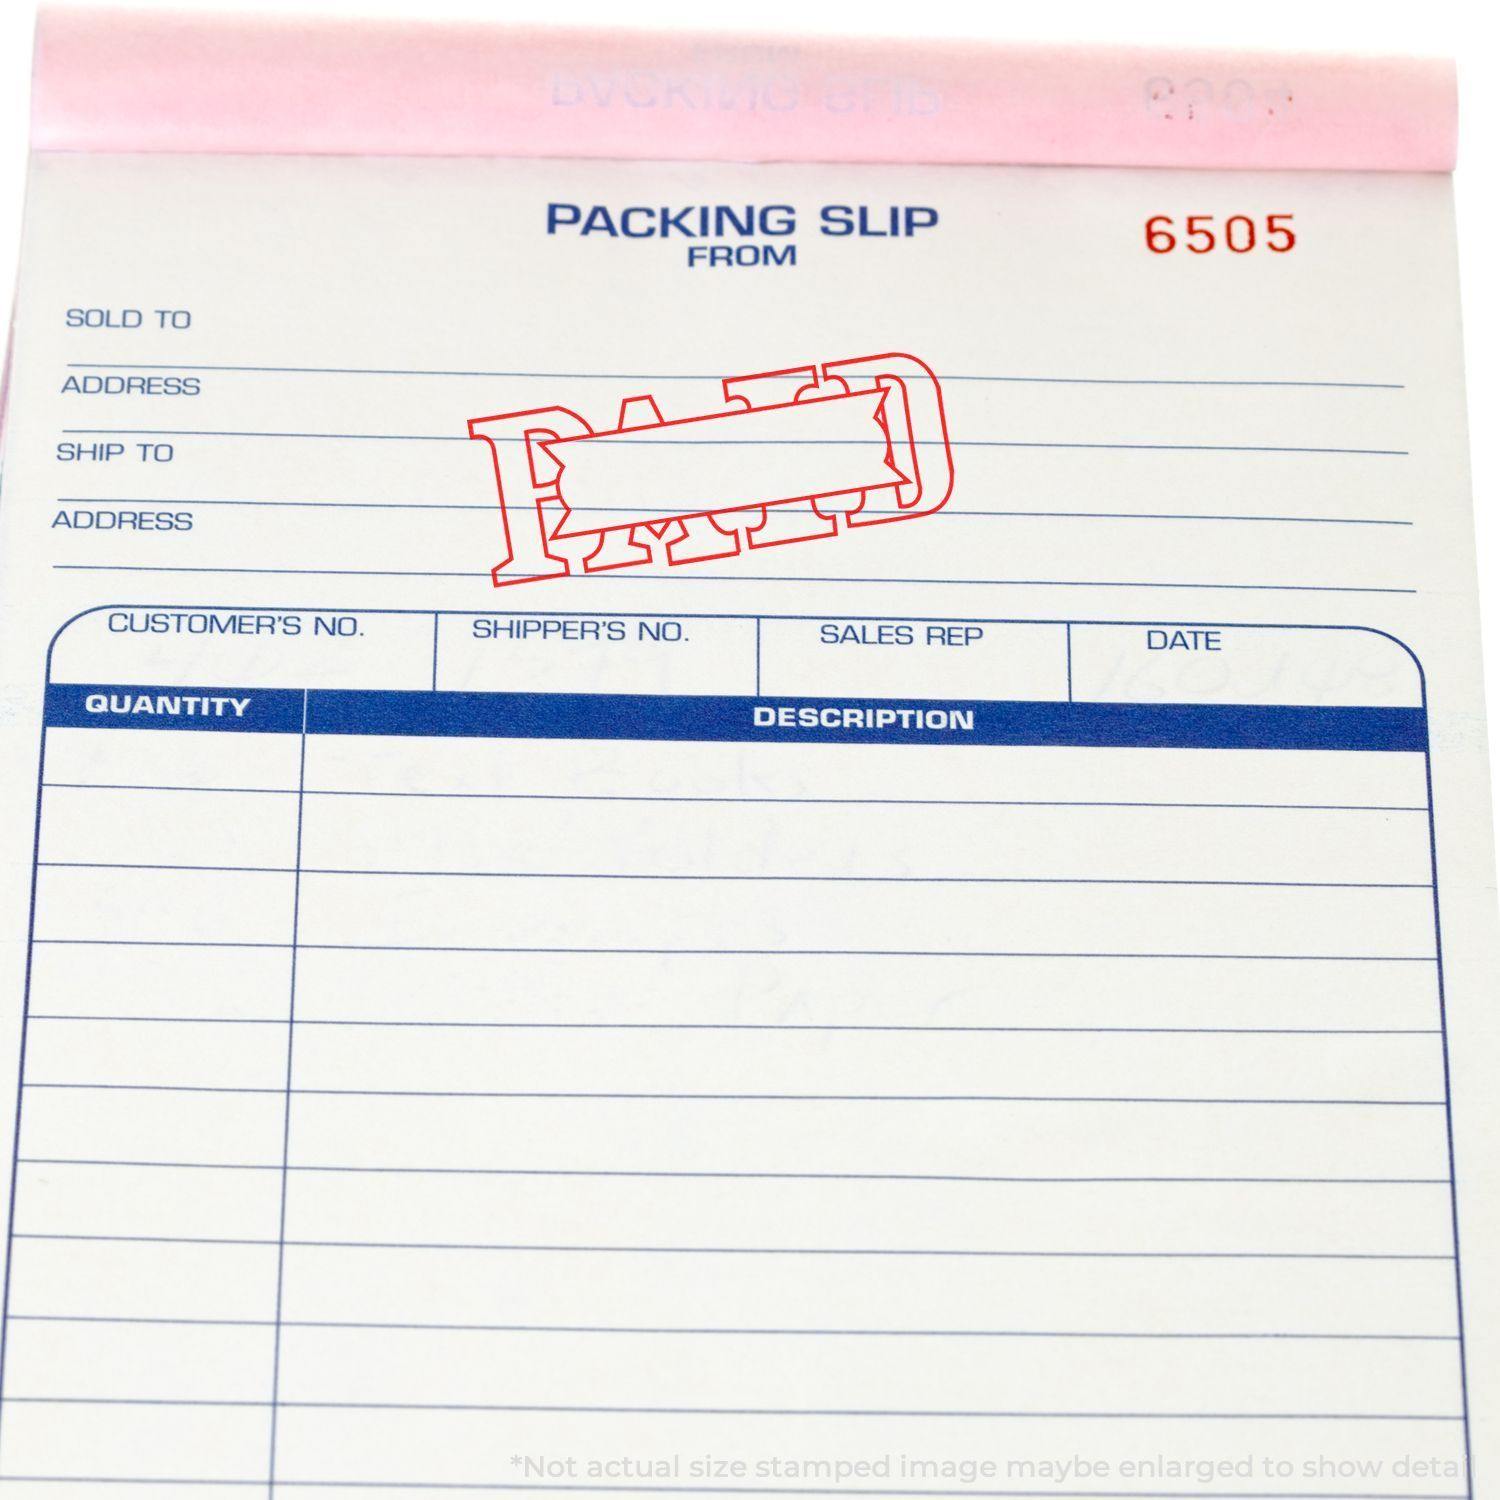 A stock office rubber stamp with a stamped image showing how the text "PAID" in a large outline font with a small box in the center of the text is displayed after stamping.